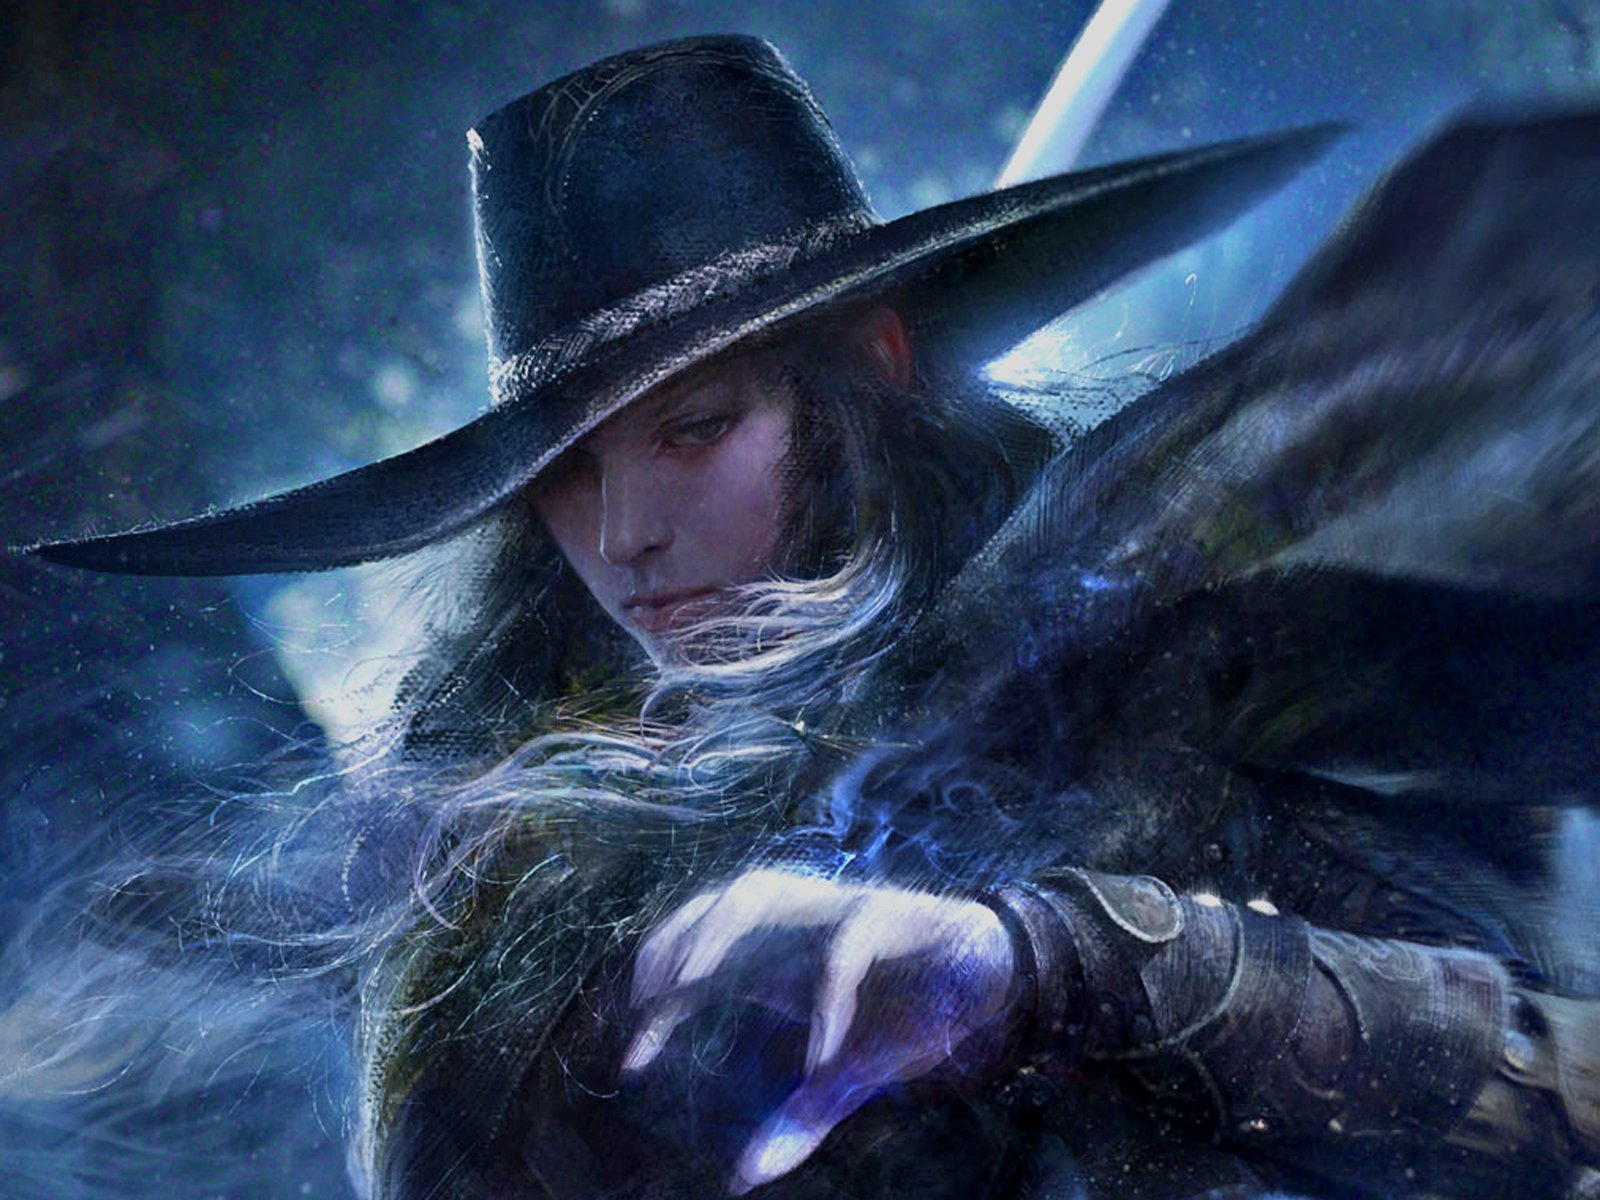 Vampire Hunter D HD desktop wallpaper with an intense anime vibe, featuring a mysterious and captivating character in a dark setting.